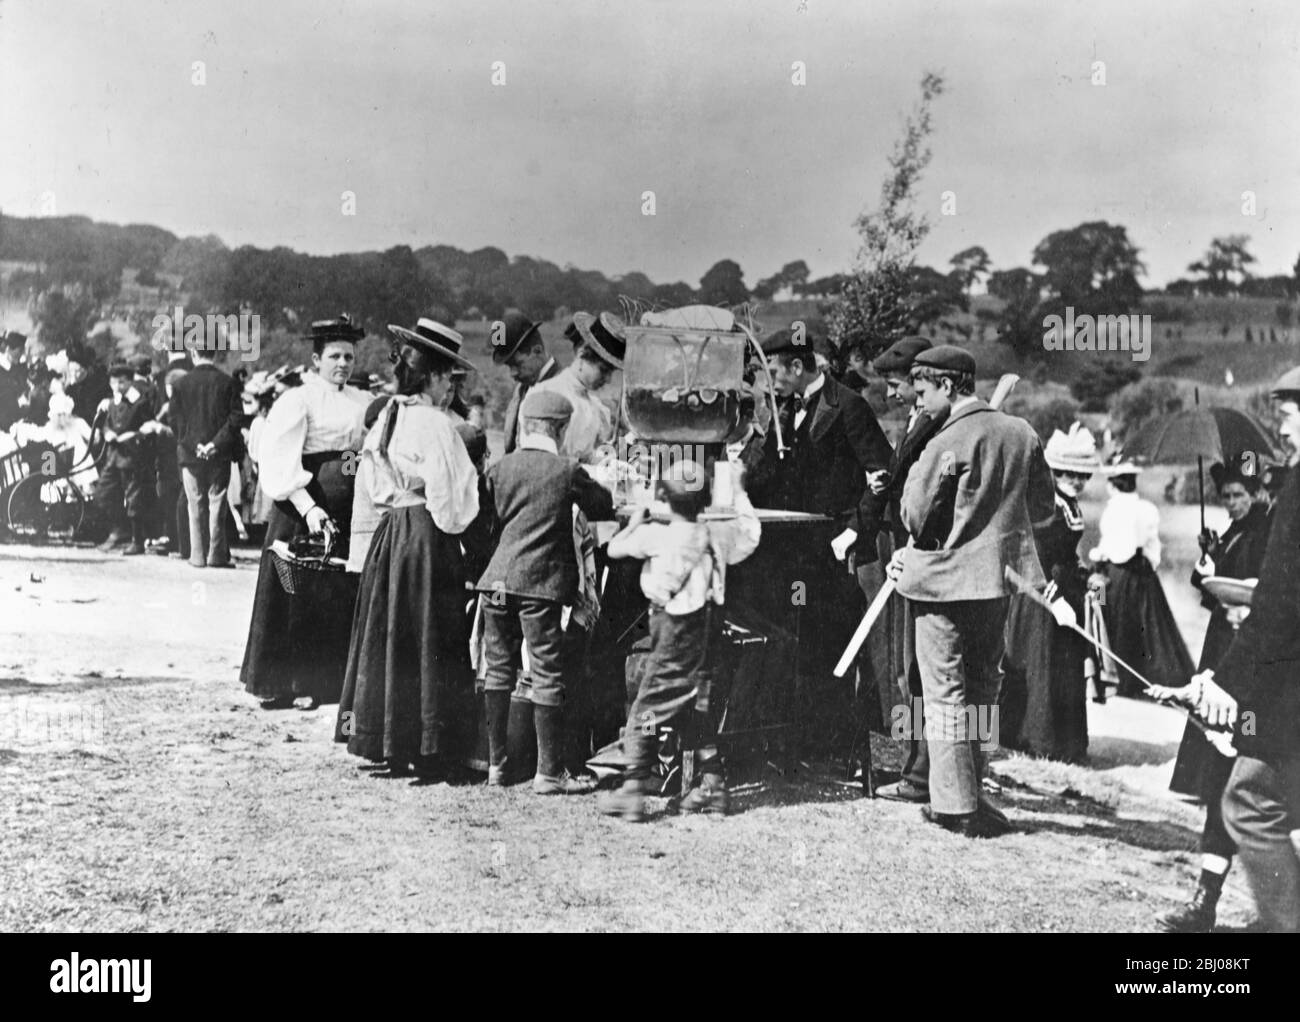 A lemonade stall offering refreshments to vistors of a park. England. c.1895 - Photograph by Paul Martin (d.1944) Stock Photo